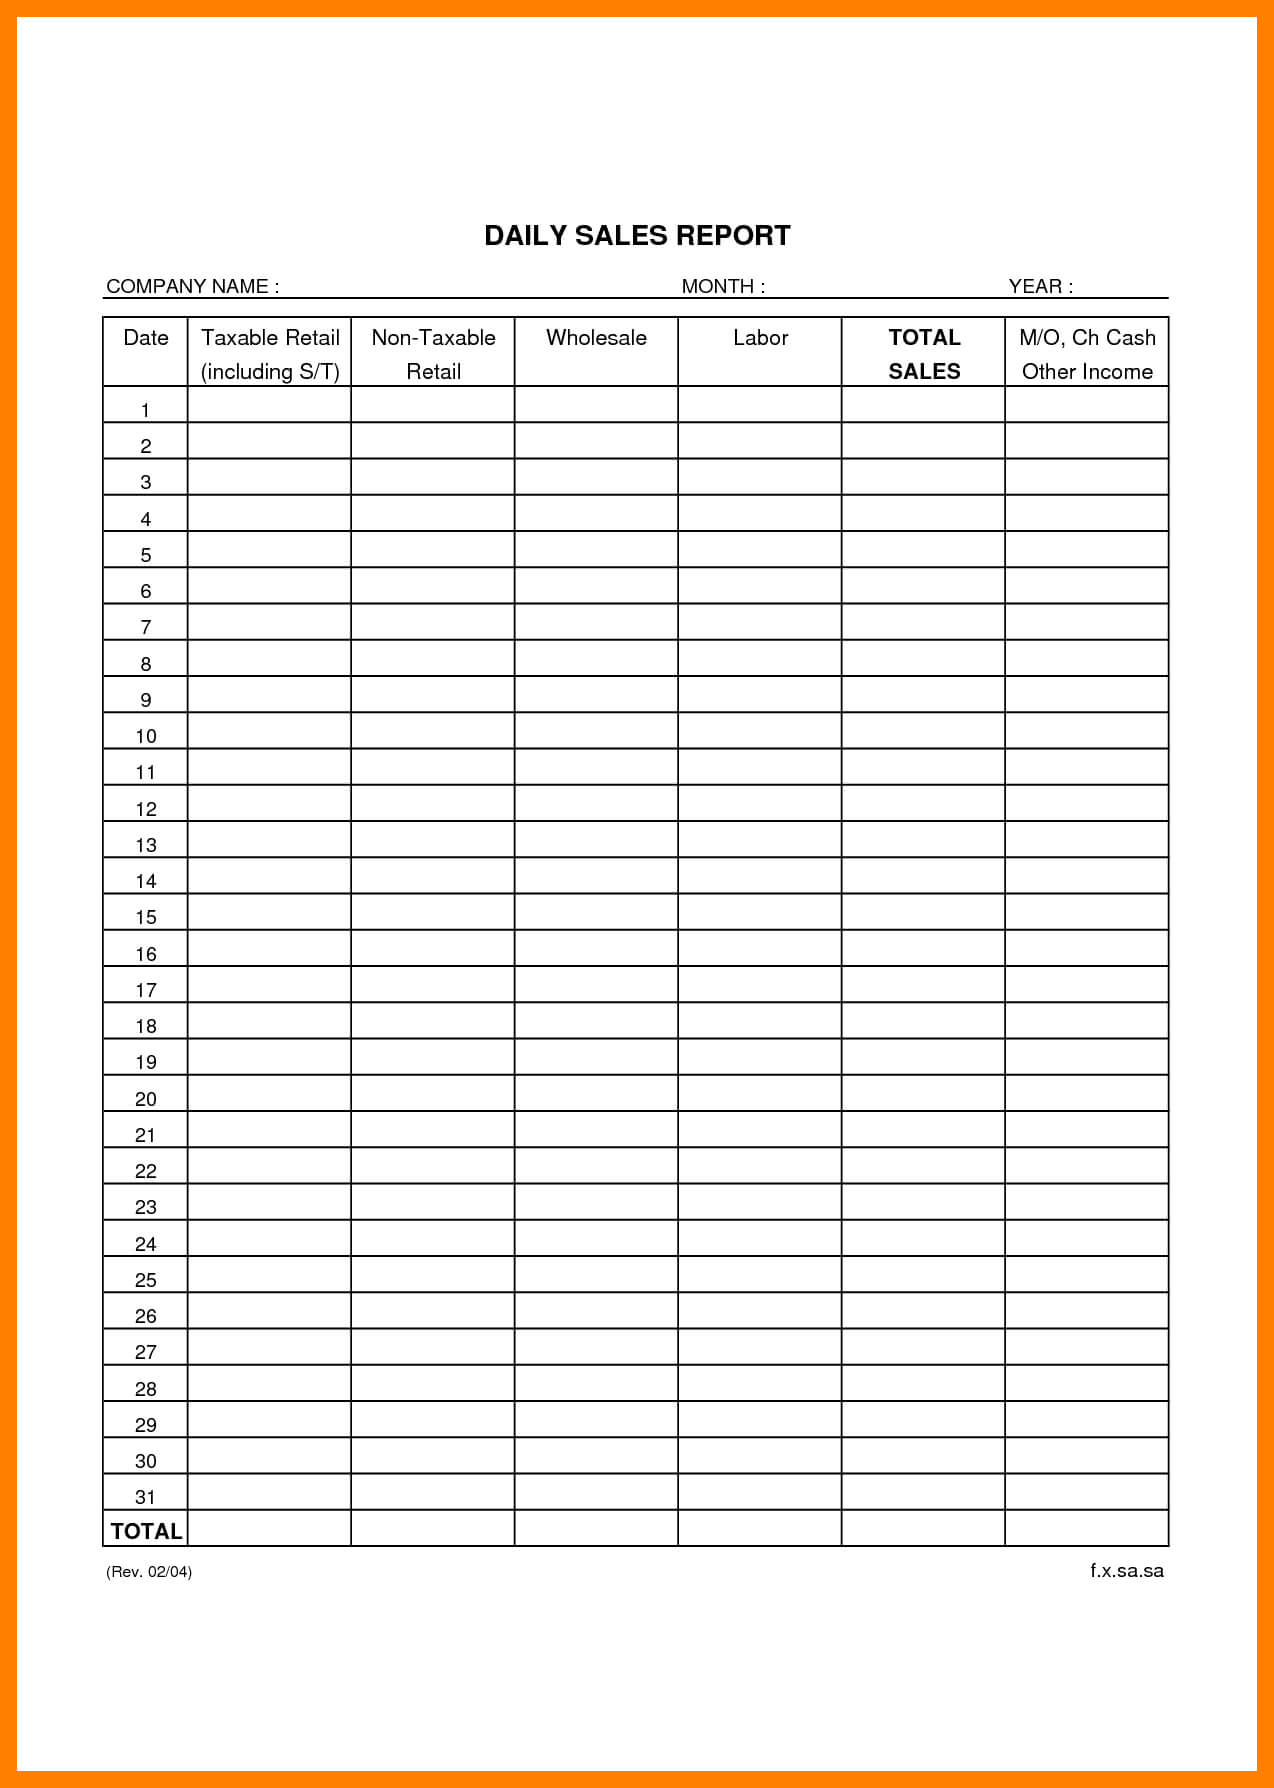 Excel Sales Report Template Free Download – Atlantaauctionco Intended For Excel Sales Report Template Free Download